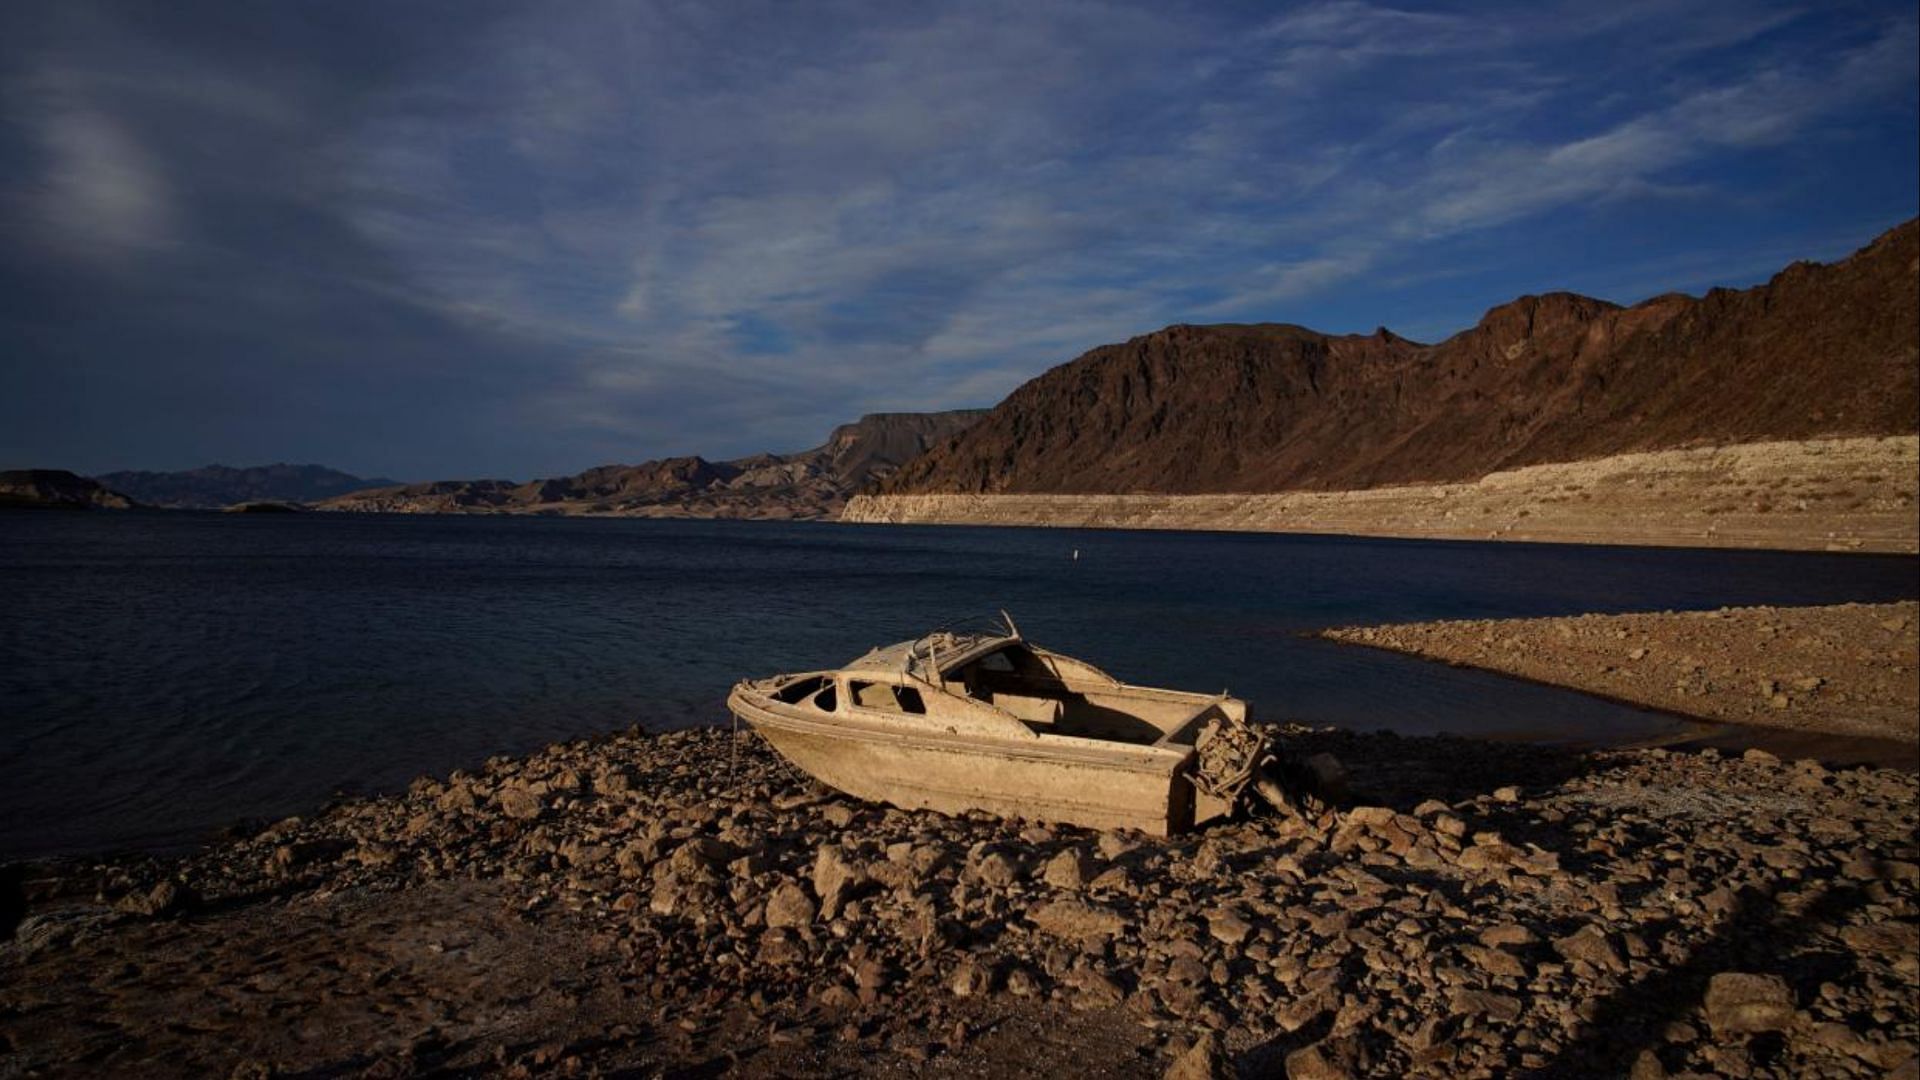 Human remains belonging to a person from the 70s were discovered at Lake Mead (Image via Shutterstock)